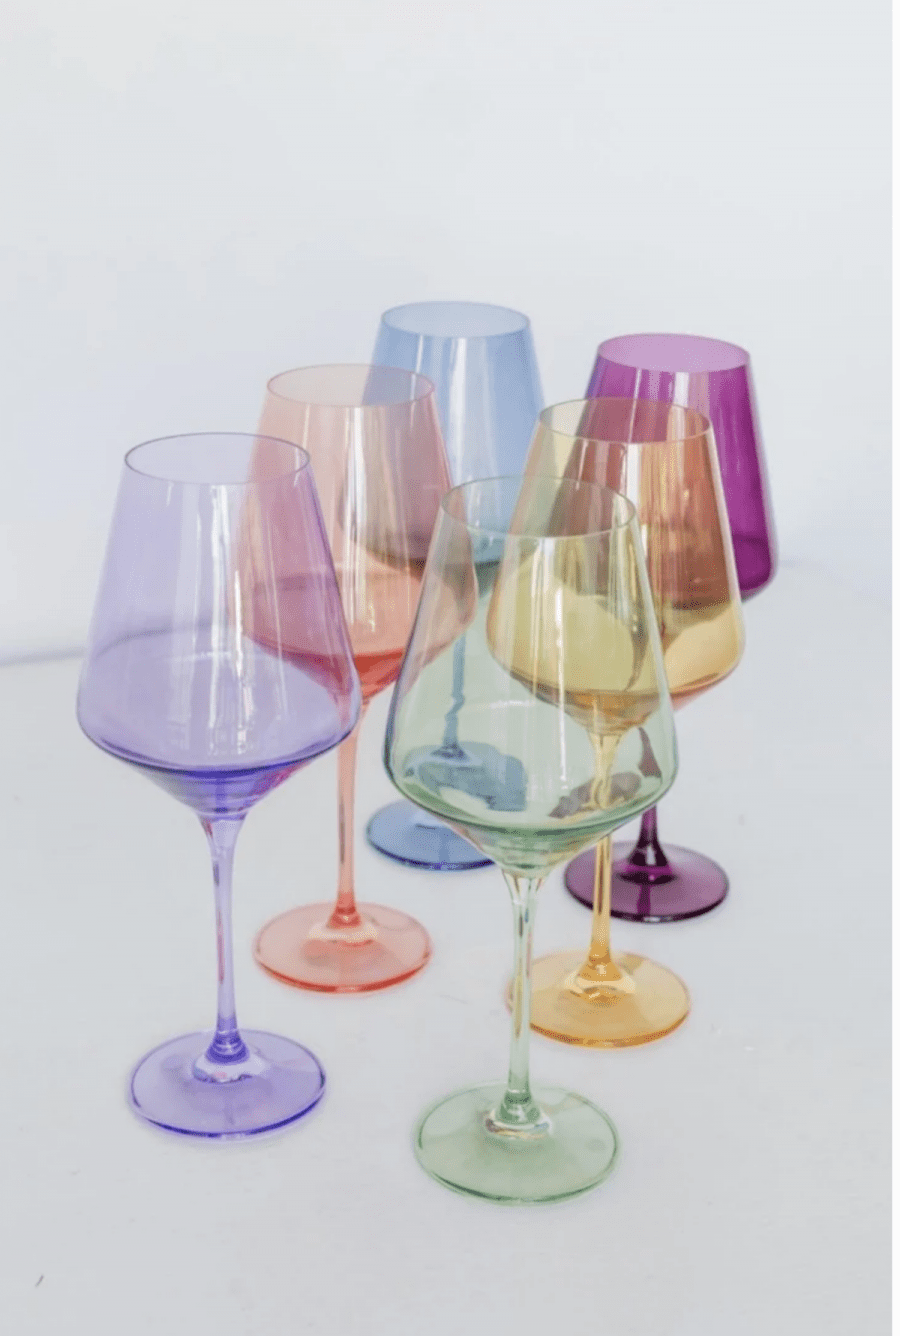 https://thelocalpalate.com/wp-content/uploads/2022/06/Estelle-Colored-Glass-900x1336-1.png